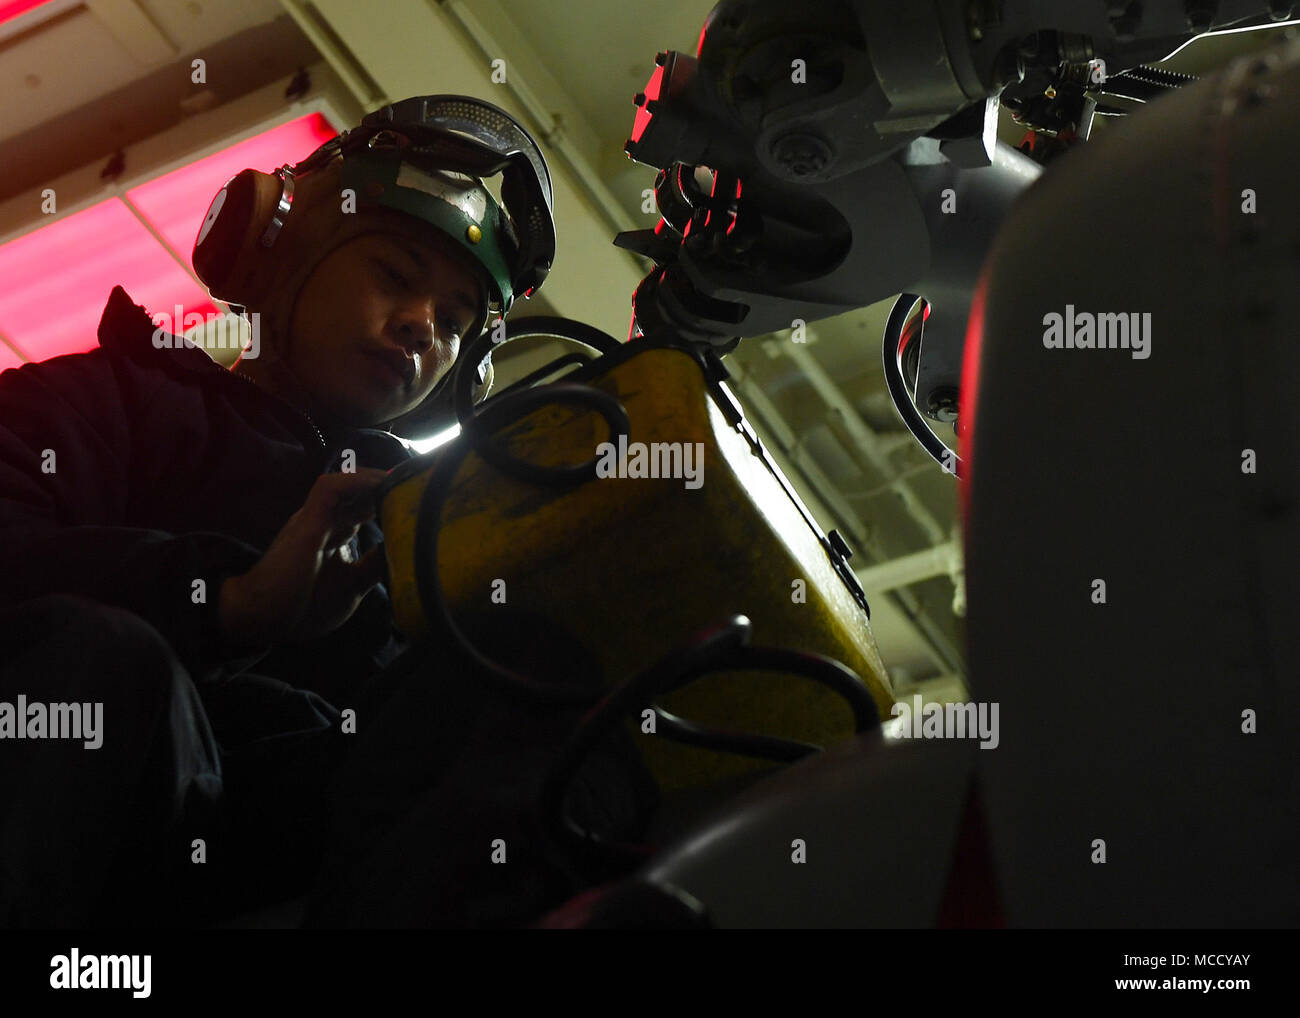 180212-N-FN963-0004 PACIFIC OCEAN (Feb. 12, 2018) Aviation Structural Mechanic 2nd Class Benjamin Mones, from San Diego, conducts maintenance on an MH-60R Sea Hawk, assigned to the “Scorpions” of Helicopter Maritime Strike Squadron (HSM) 49, aboard the Arleigh Burke-class guided-missile destroyer USS Sterett (DDG 104). Sterett is on a scheduled deployment to conduct operations in the Indo-Pacific region. It will also support the Wasp Expeditionary Strike Group (ESG) in order to advance U.S. Pacific Fleet’s Up-Gunned ESG concept and will train with forward-deployed amphibious ships across all m Stock Photo